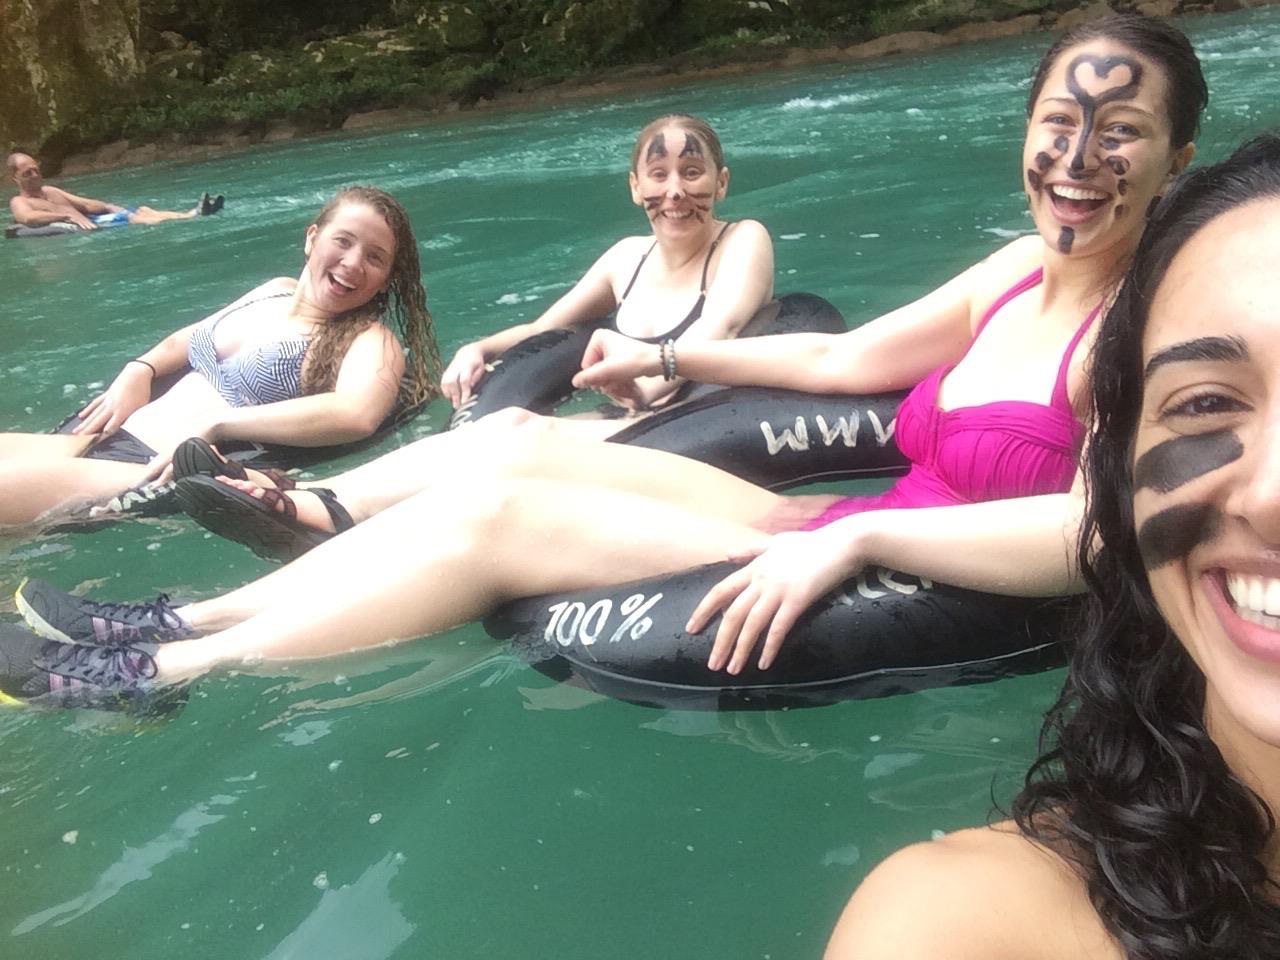 You are a student again, take advantage of it! This is me with "princesa" face paint rafting down Semuc Champey in Guatemala during spring break. Don’t forget, these are likely our last spring breaks for a while!